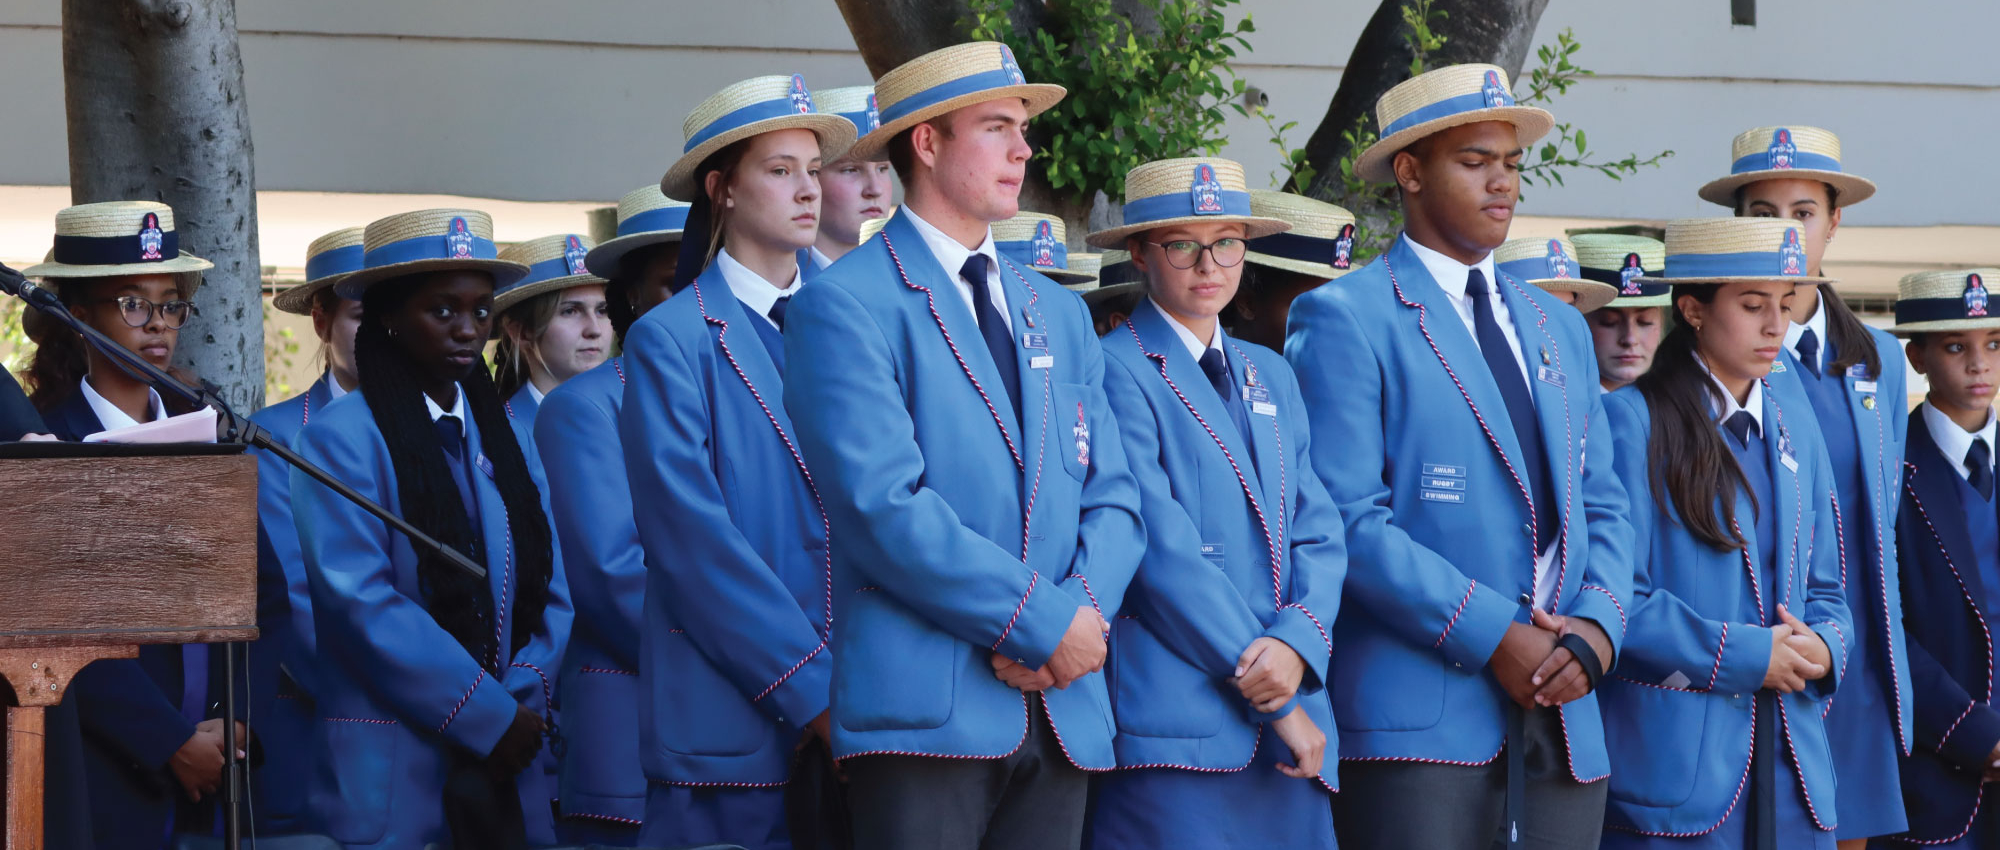 Northcliff High School is a centre of excellence - a safe, secure, disciplined and caring environment for all. As a proudly independent state high school, we offer a firm foundation of traditions and values which have been carried through from when the school was established in 1969 to today.